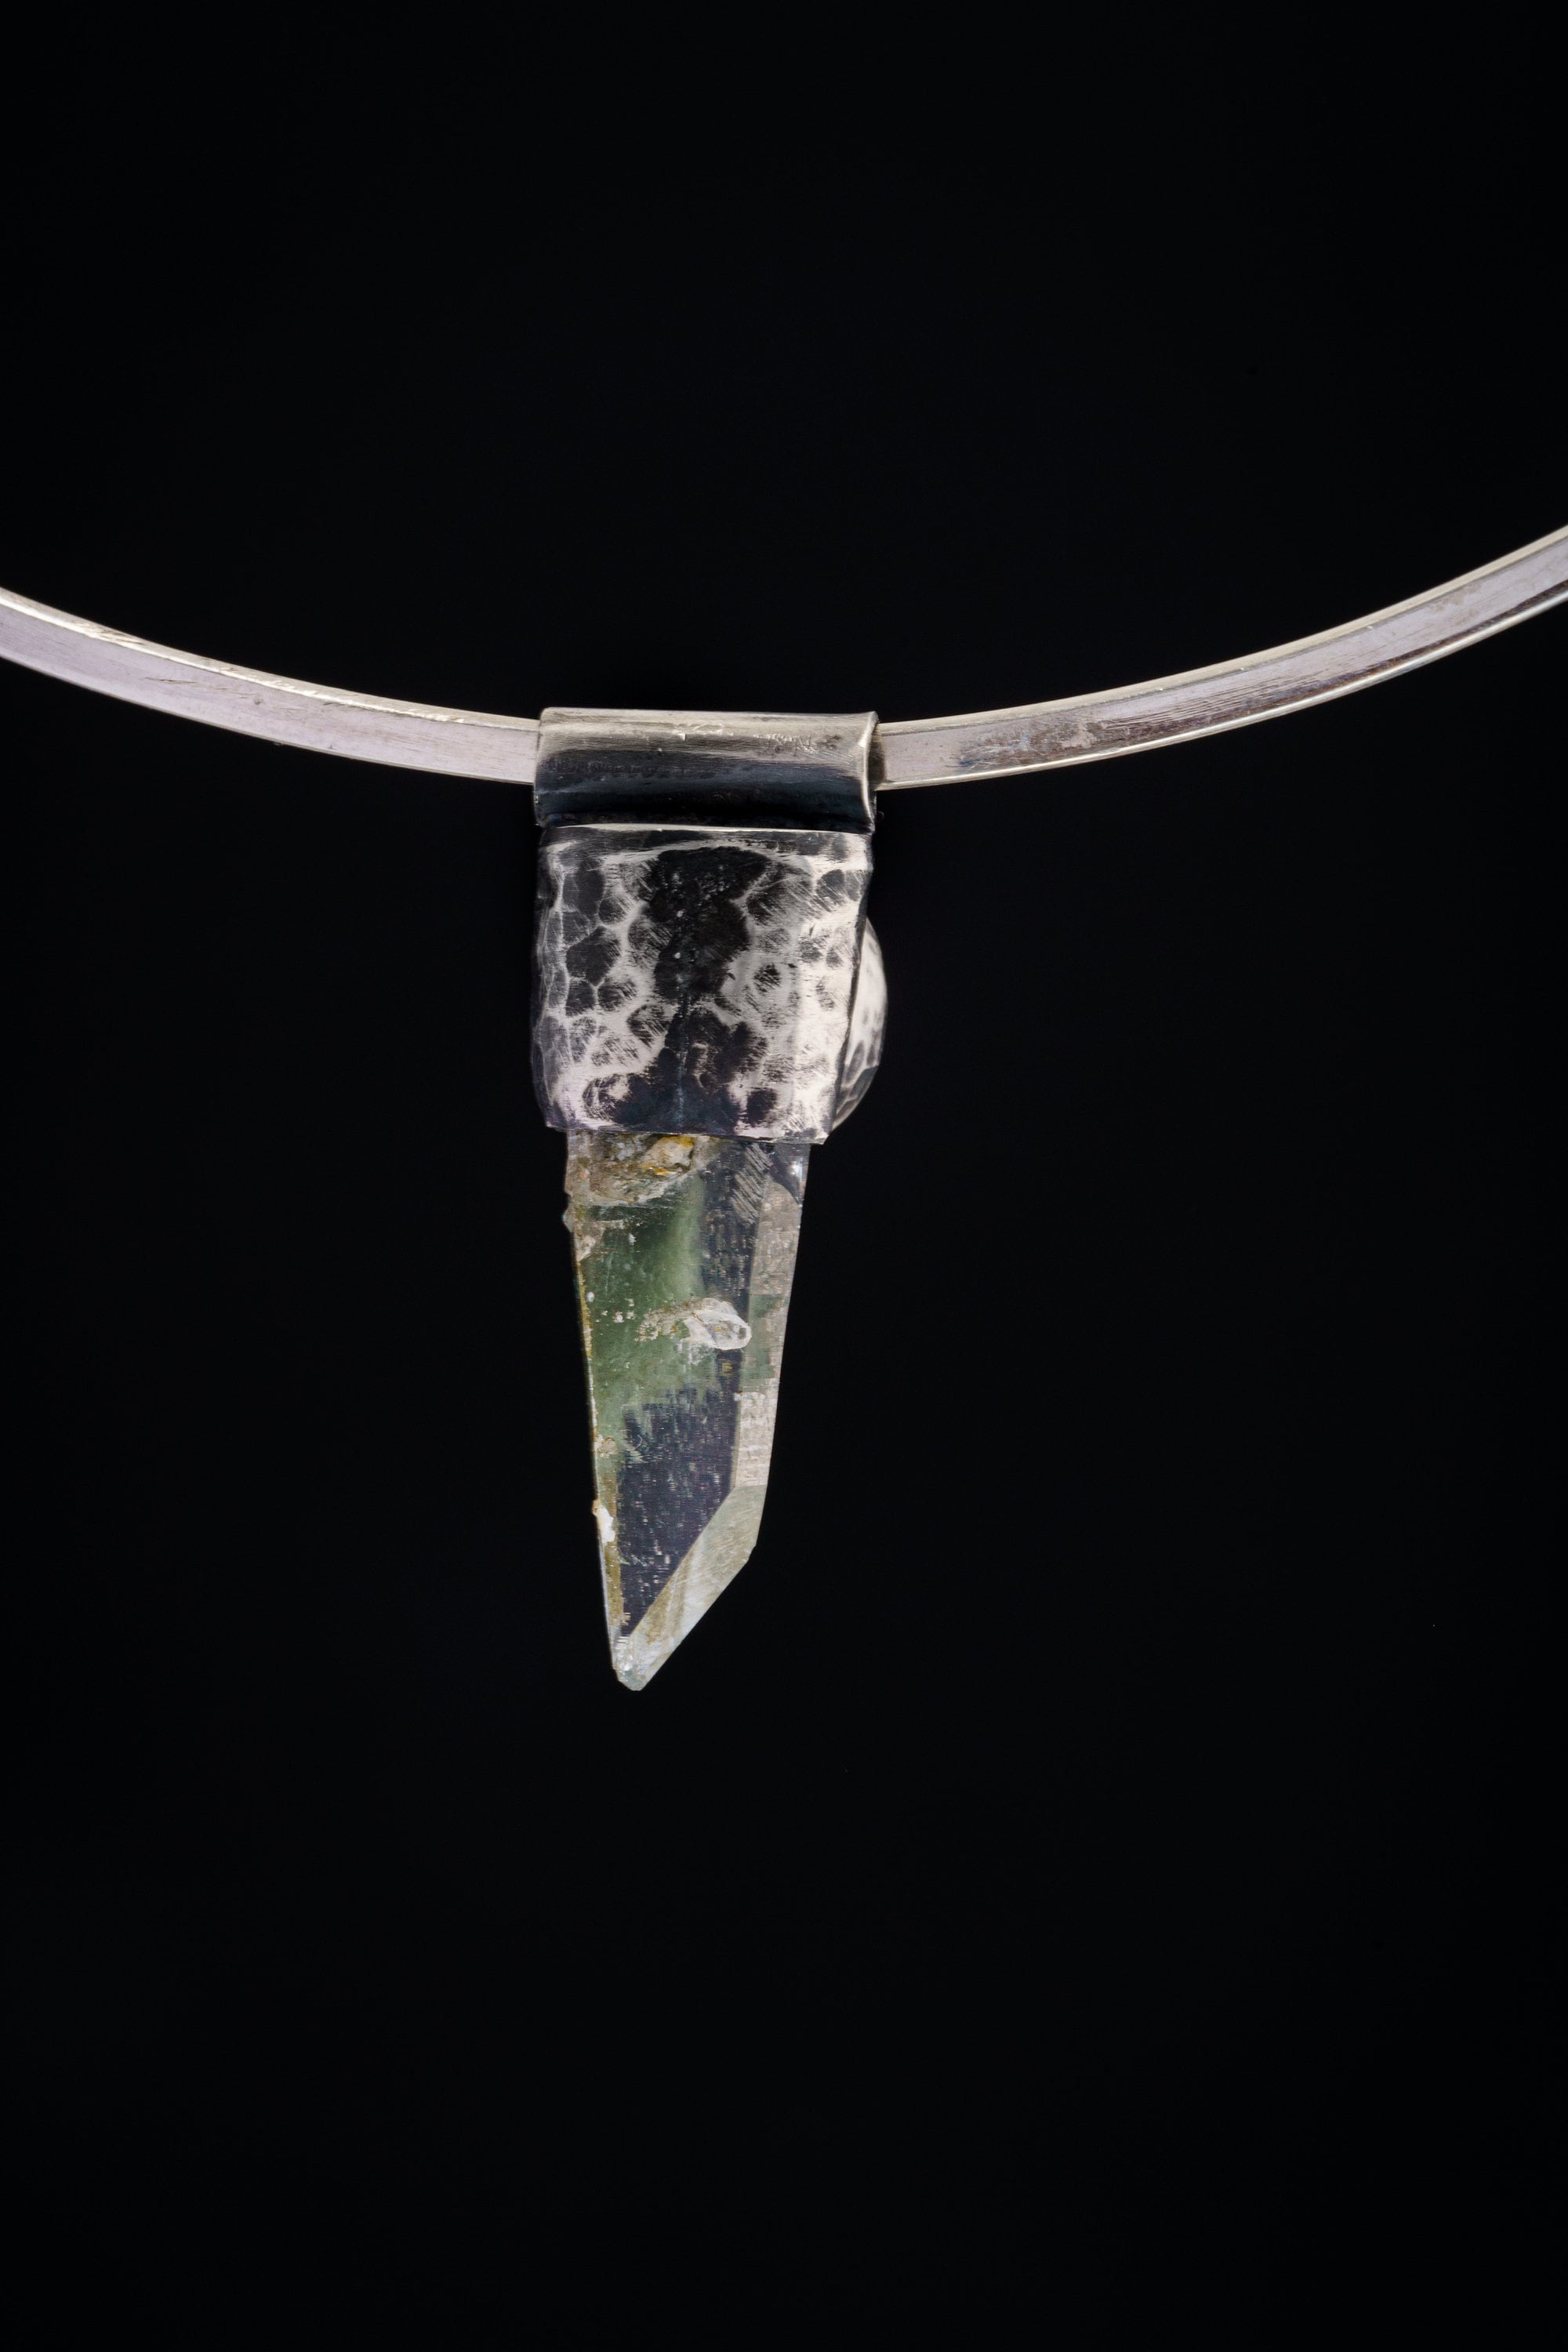 Nepali Green Chlorite Quartz Point with a South Sea Pearl - Stack Pendant - Textured & Oxidised 925 Sterling Silver - NO 8